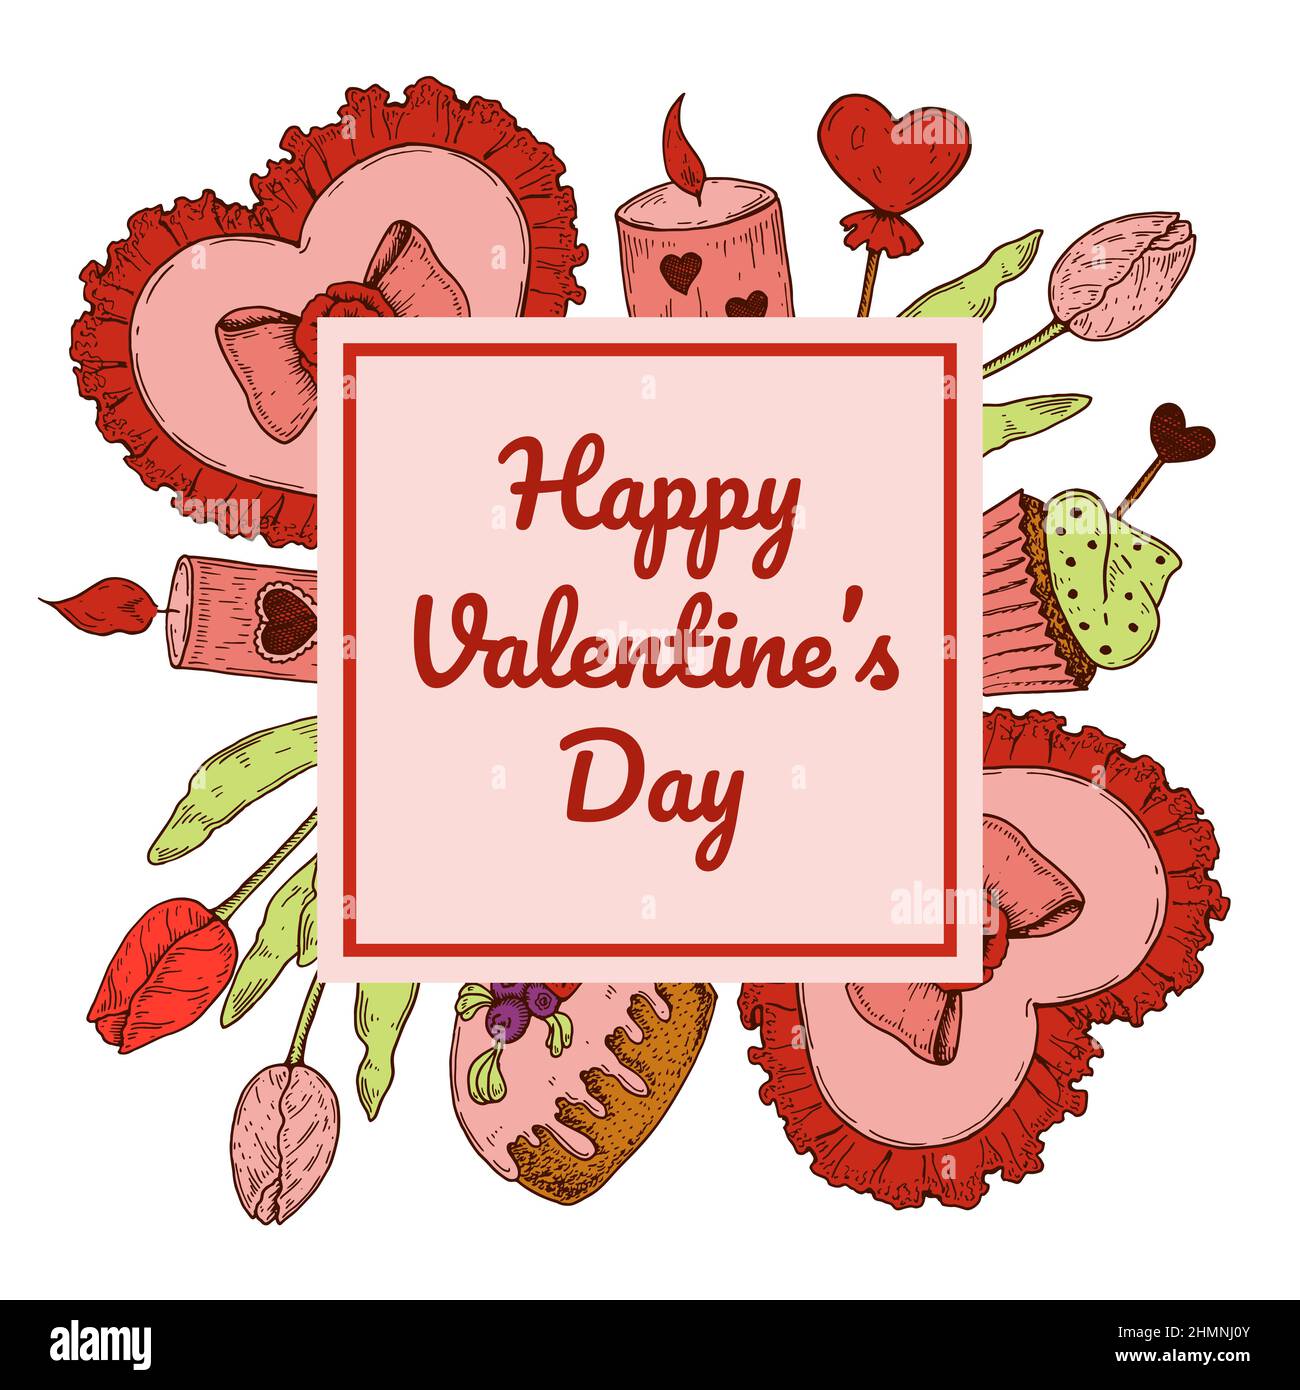 Valentines day greeting card with hand drawn elements. Vector illustration Stock Vector